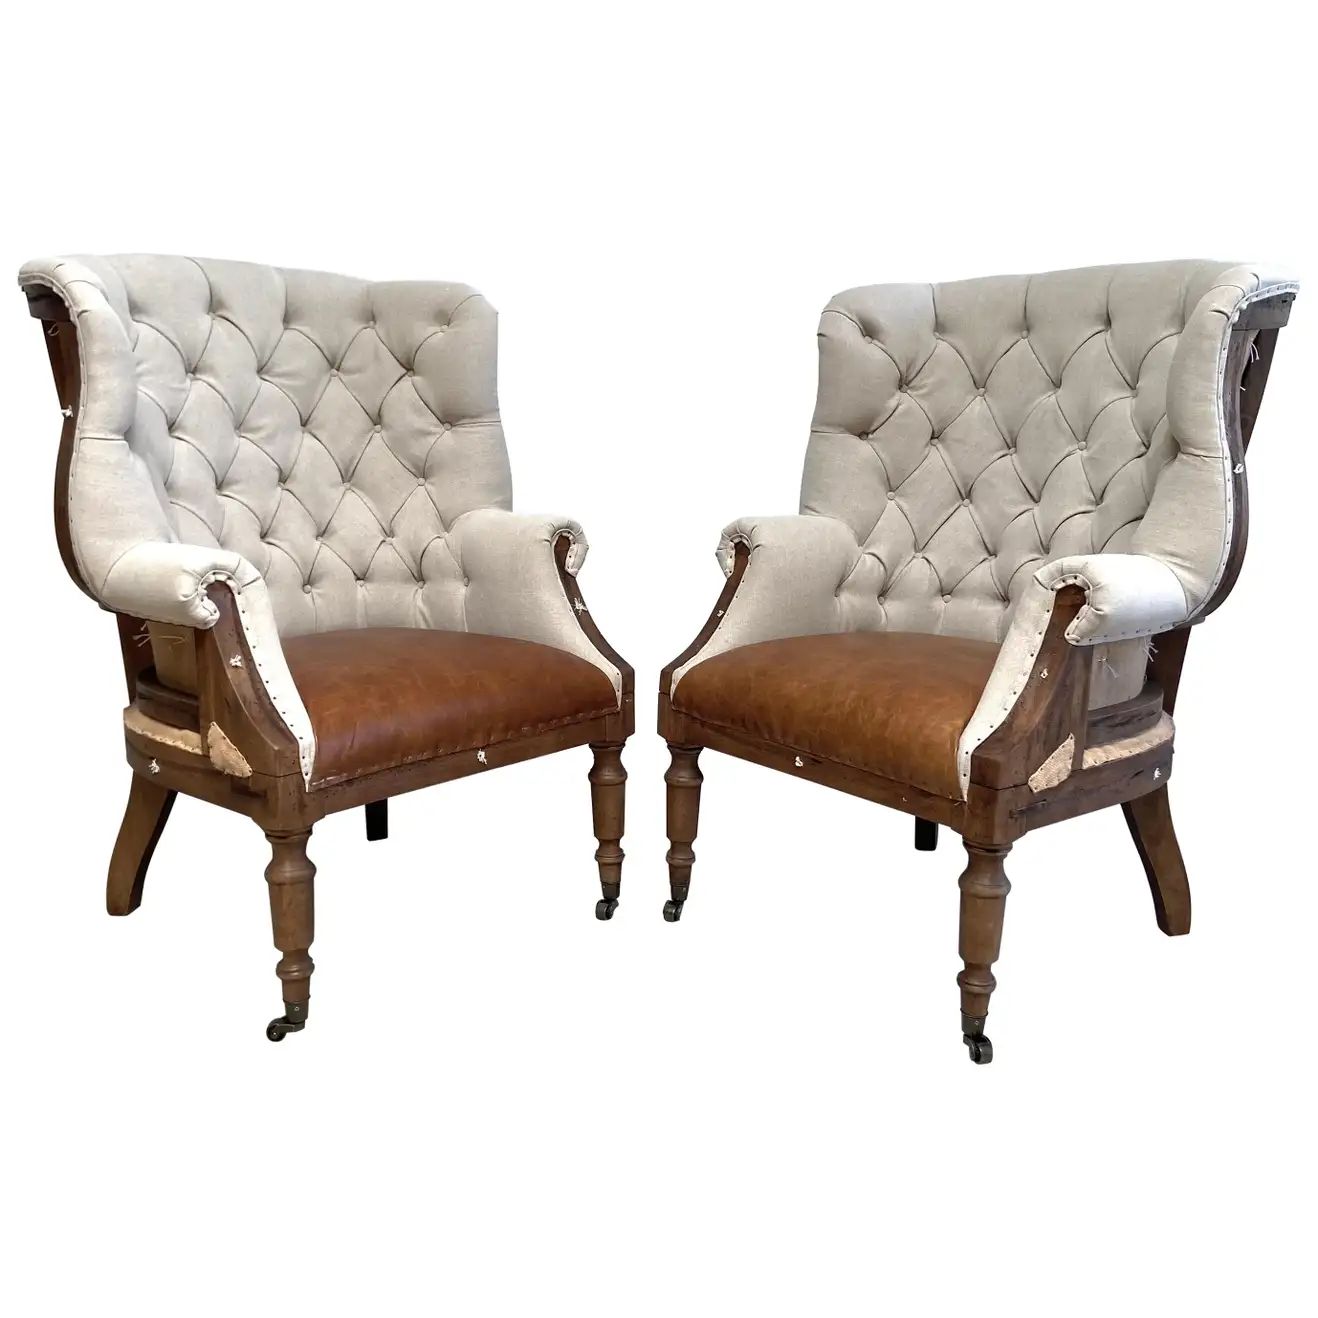 Linen and Leather Deconstructed Wing Back Chairs with Caster Wheels | 1stDibs